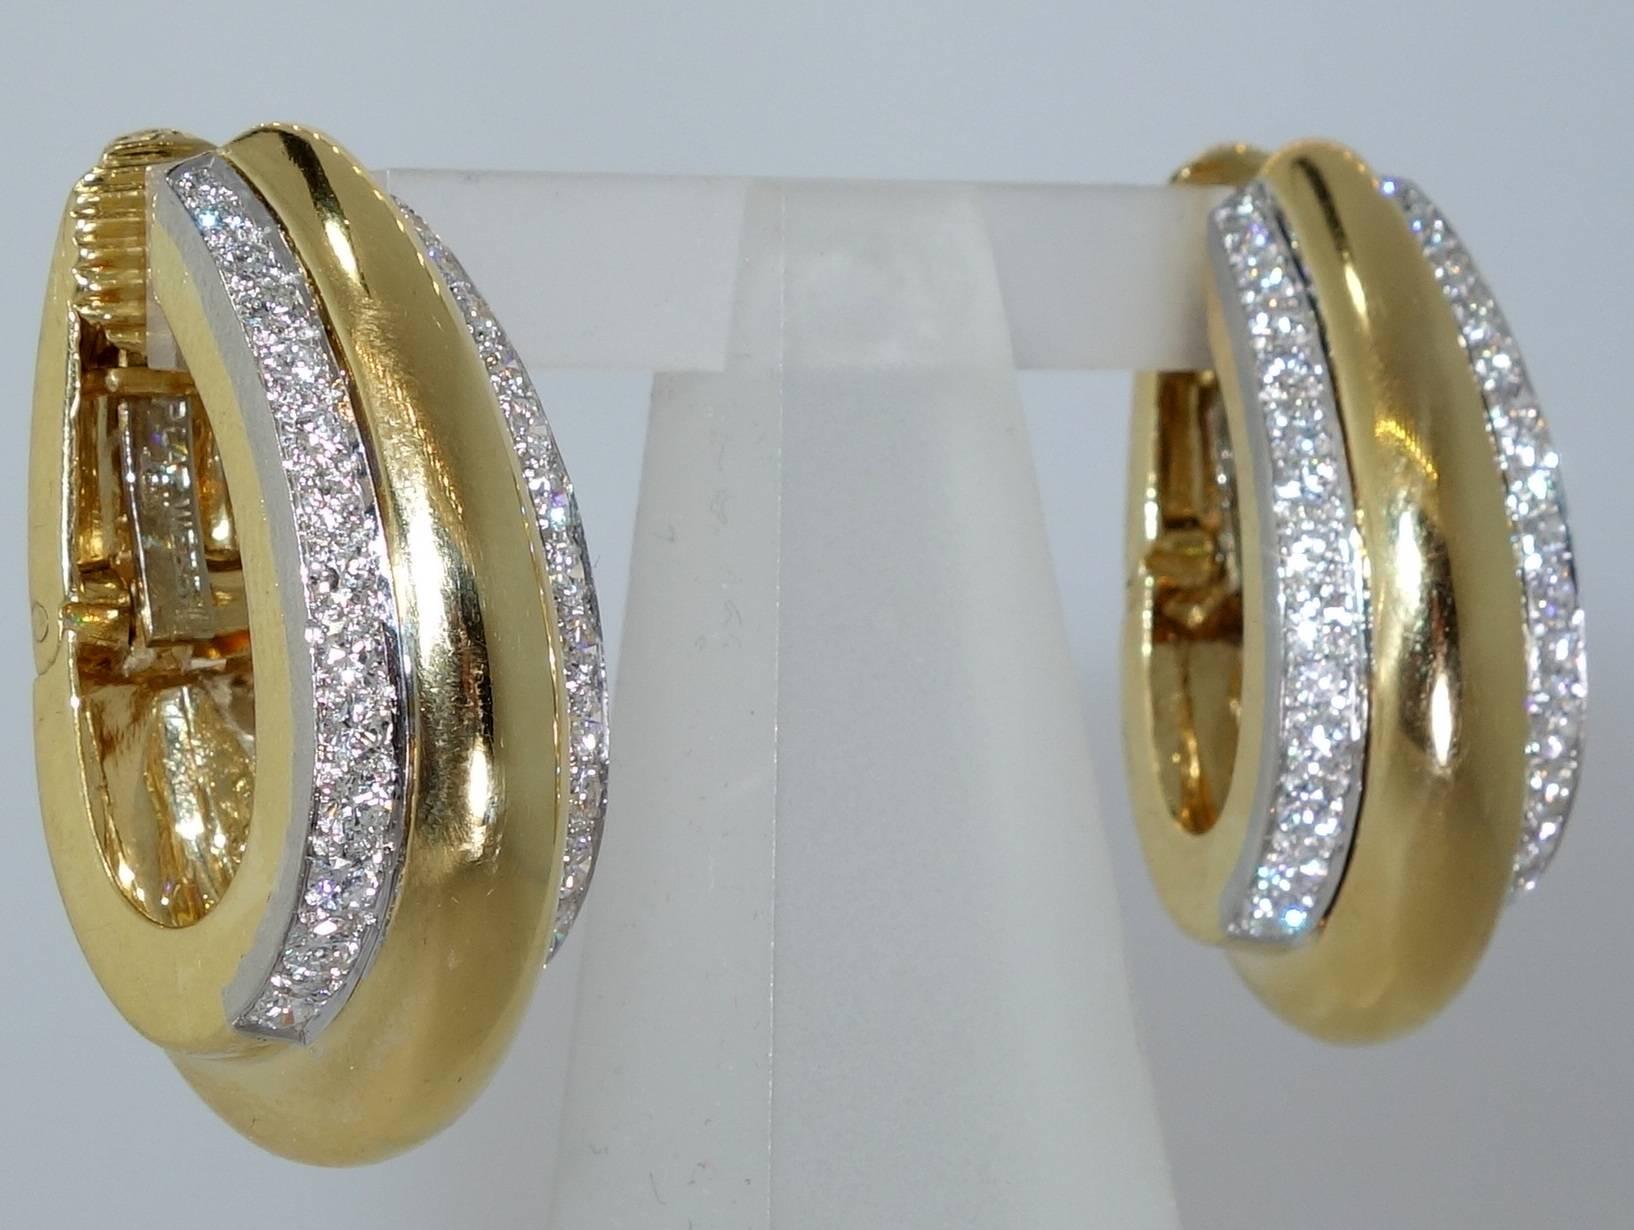 56  fine white diamonds amounting to 3.6 cts of round diamonds are set in platinum in these 18K yellow gold hoop style earrings.  In fine condition, these 1.5 inches in length hoop style earrings are  signed on the verso by the world famous David